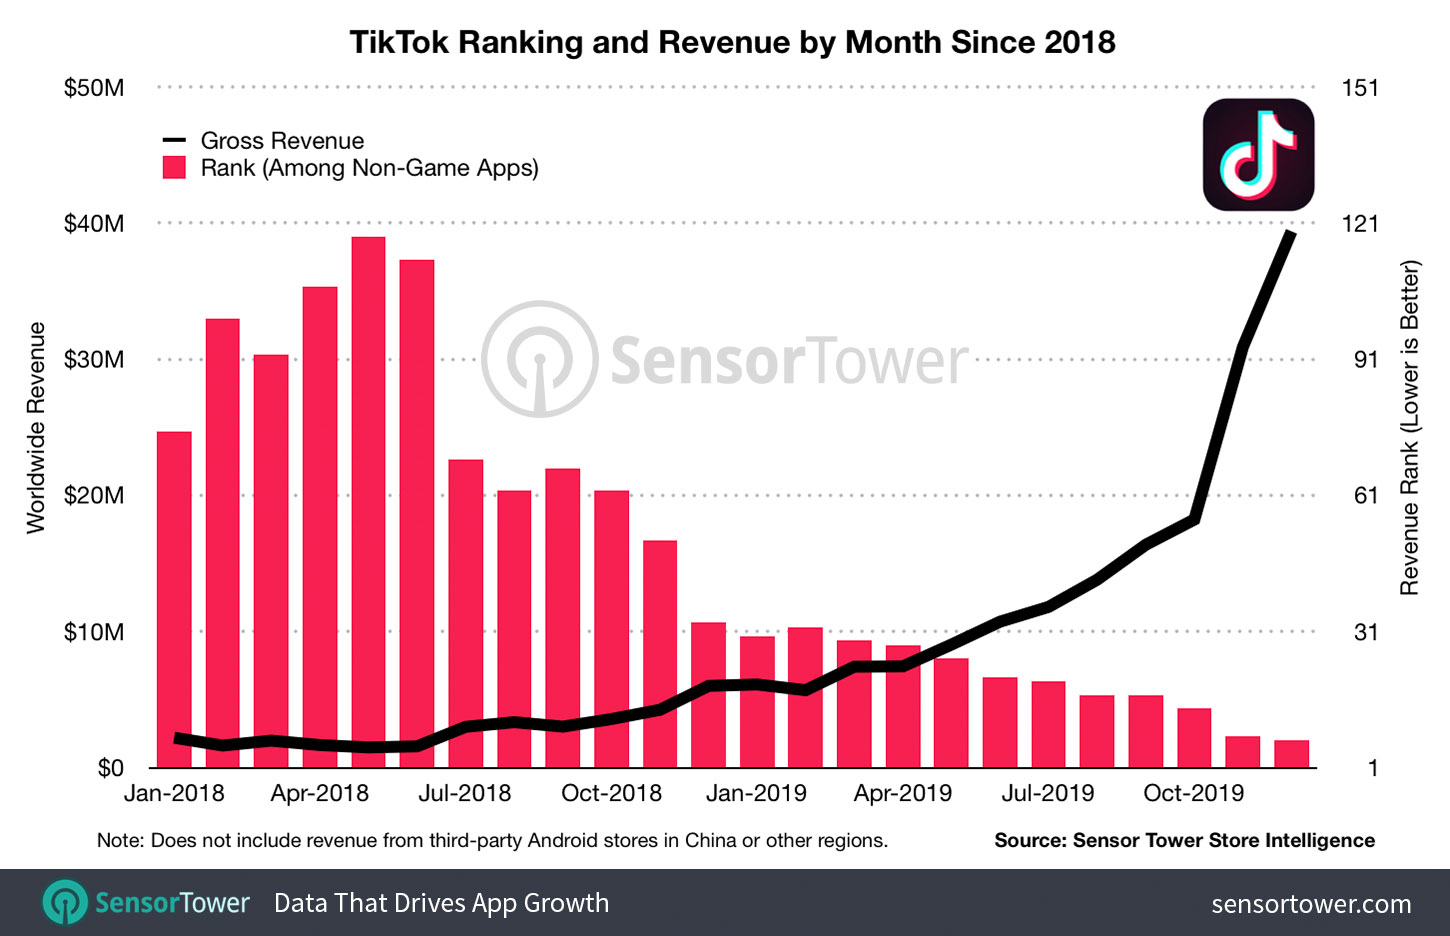 TikTok Rankings and Revenue by Month Since 2018